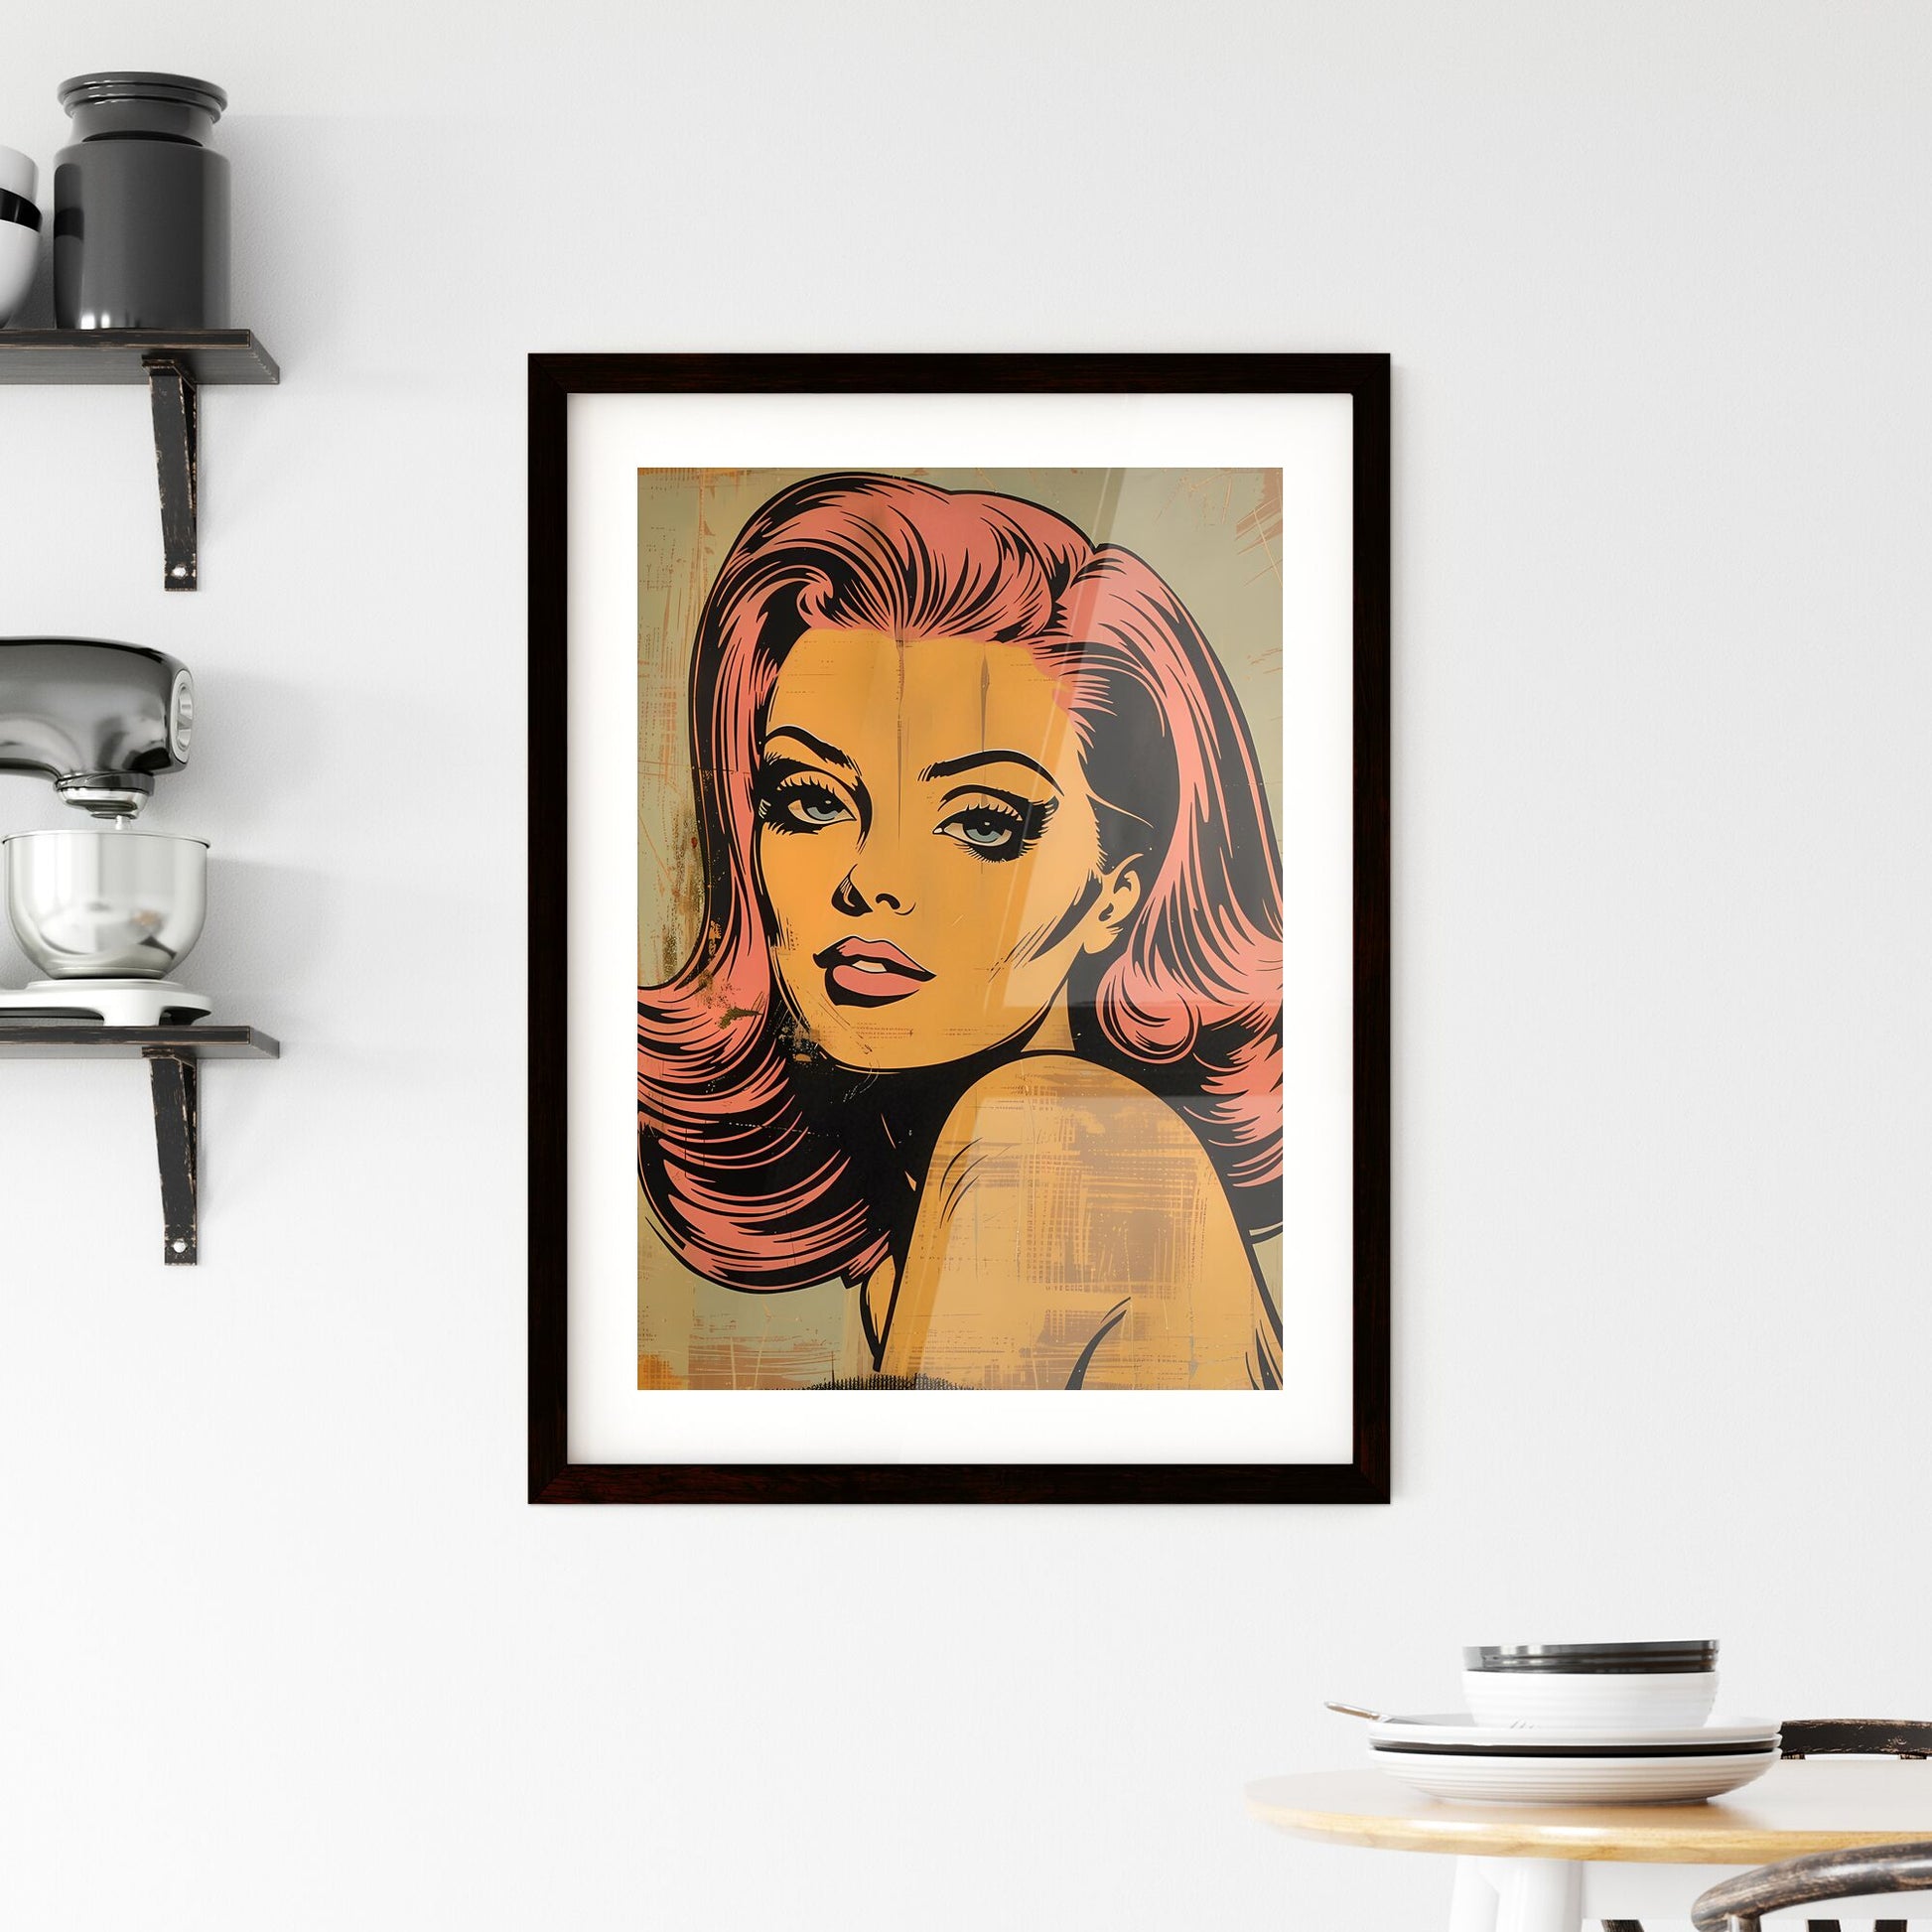 Vibrant Retro Pop Art Painting Poster with Light Pink Haired Woman from 1950s Comics Default Title